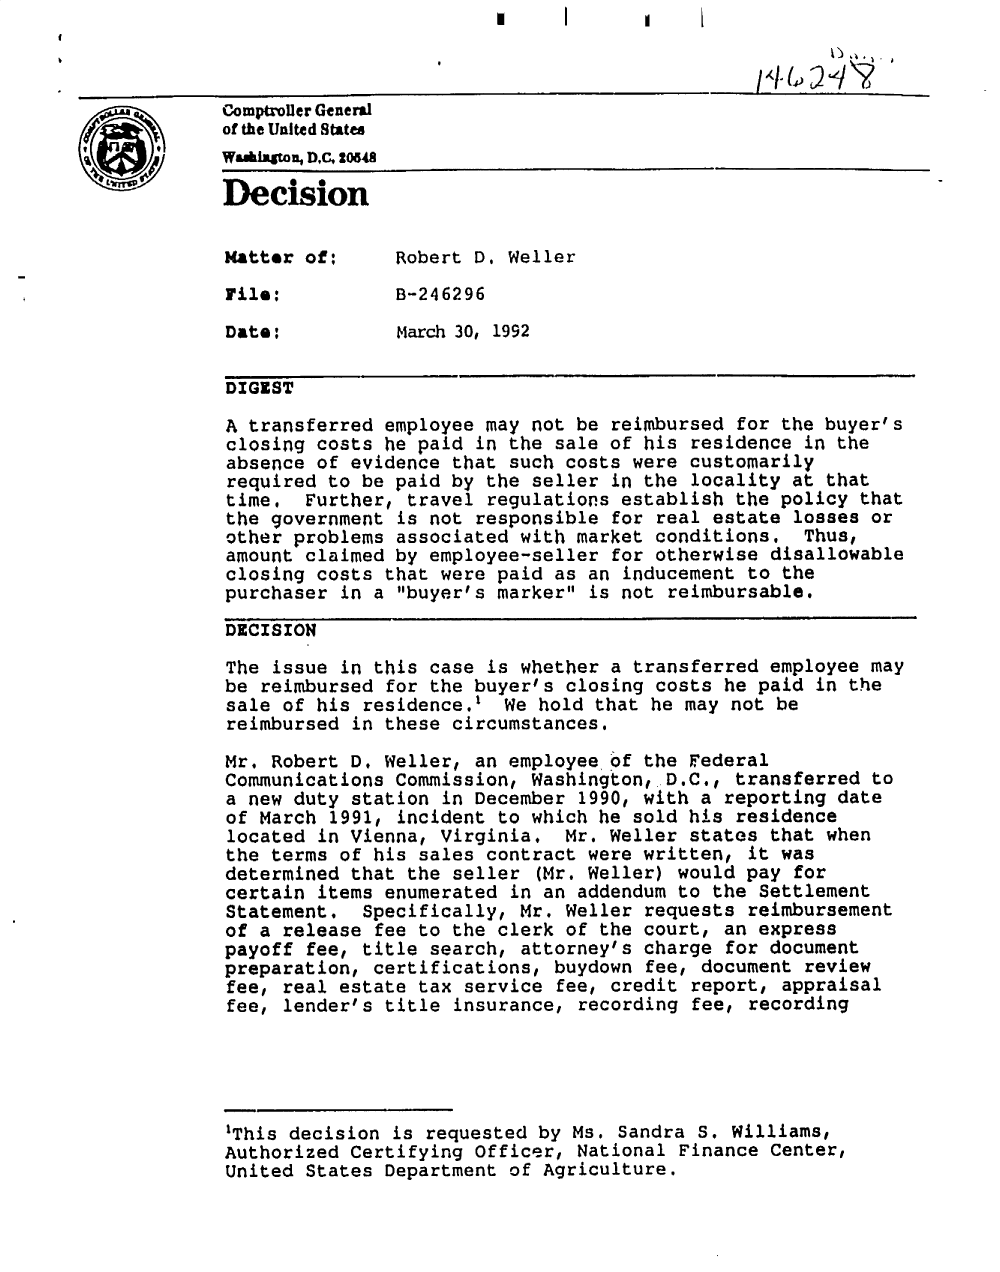 handle is hein.gao/gaobadoak0001 and id is 1 raw text is: 


Comptroller General
of the United States
Wa&Ilnso, DC, 20548
Decision



Matter of:      Robert D, Weller

File:           B-246296

Date:           March 30, 1992

DIGEST

A transferred employee may not be reimbursed for the buyer's
closing costs he paid in the sale of his residence in the
absence of evidence that such costs were customarily
required to be paid by the seller in the locality at that
time, Further, travel regulations establish the policy that
the government is not responsible for real estate losses or
other problems associated with market conditions. Thus,
amount claimed by employee-seller for otherwise disallowable
closing costs that were paid as an inducement to the
purchaser in a buyer's marker is not reimbursable.

DECISION

The issue in this case is whether a transferred employee may
be reimbursed for the buyer's closing costs he paid in the
sale of his residence.' We hold that he may not be
reimbursed in these circumstances.

Mr. Robert D. Weller, an employee of the Federal
Communications Commission, Washington, D.C., transferred to
a new duty station in December 1990, with a reporting date
of March 1991, incident to which he sold his residence
located in Vienna, Virginia. Mr. Weller states that when
the terms of his sales contract were written, it was
determined that the seller (Mr. Weller) would pay for
certain items enumerated in an addendum to the Settlement
Statement, Specifically, Mr. Weller requests reimbursement
of a release fee to the clerk of the court, an express
payoff fee, title search, attorney's charge for document
preparation, certifications, buydown fee, document review
fee, real estate tax service fee, credit report, appraisal
fee, lender's title insurance, recording fee, recording




'This decision is requested by Ms. Sandra S. Williams,
Authorized Certifying Officer, National Finance Center,
United States Department of Agriculture.


